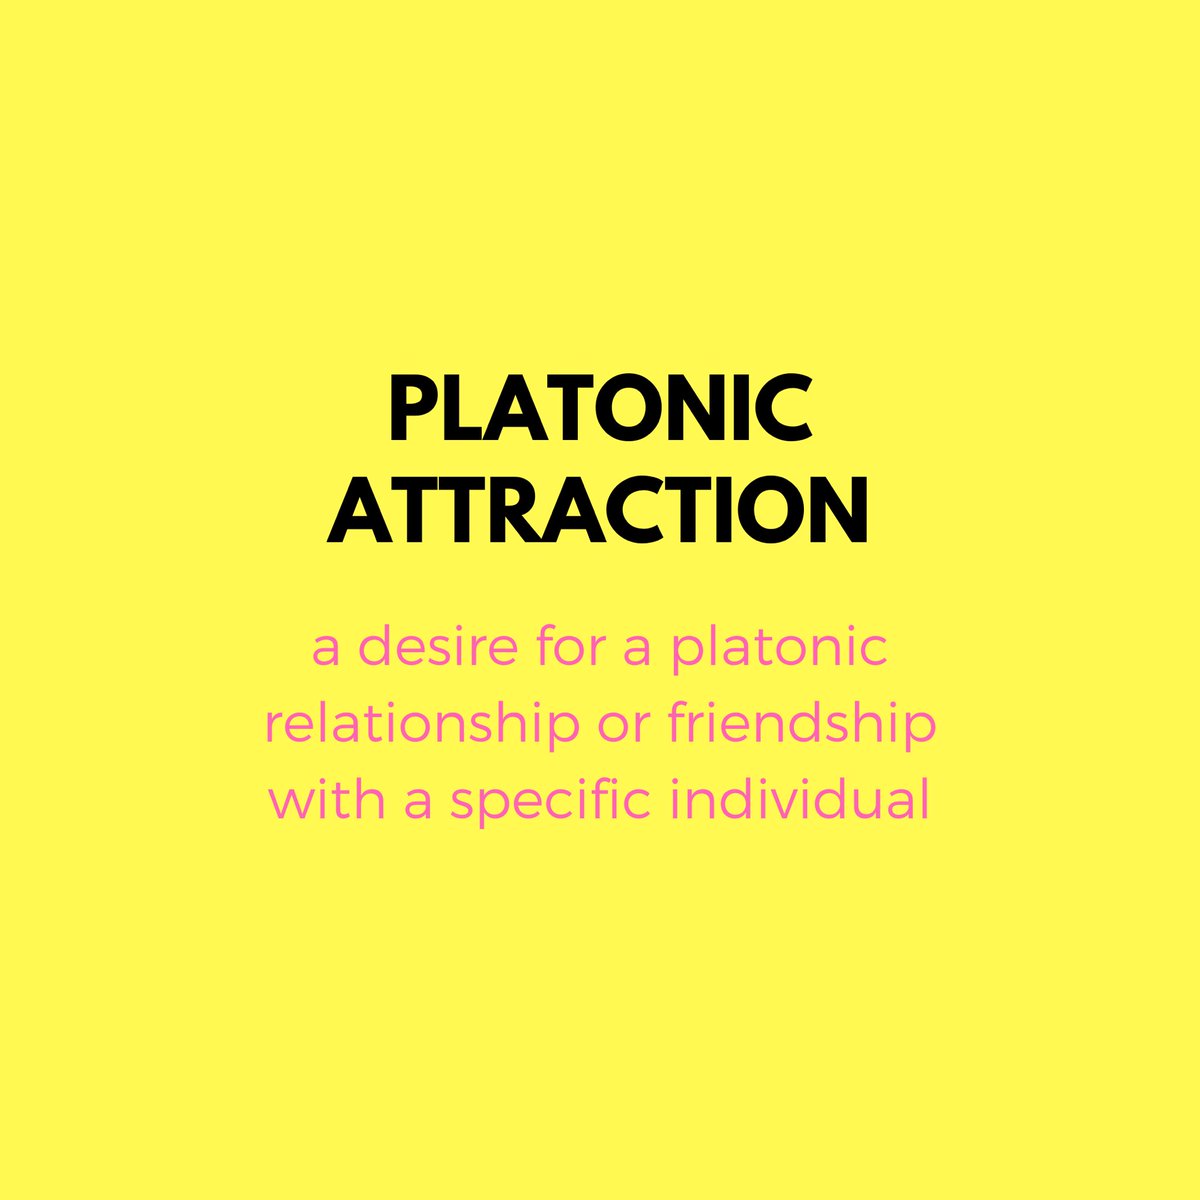 PLATONIC ATTRACTION: a desire for a platonic relationship or friendship with a specific individual. this may or may not include other types of attraction, such as aesthetic, sensual, or sexual.